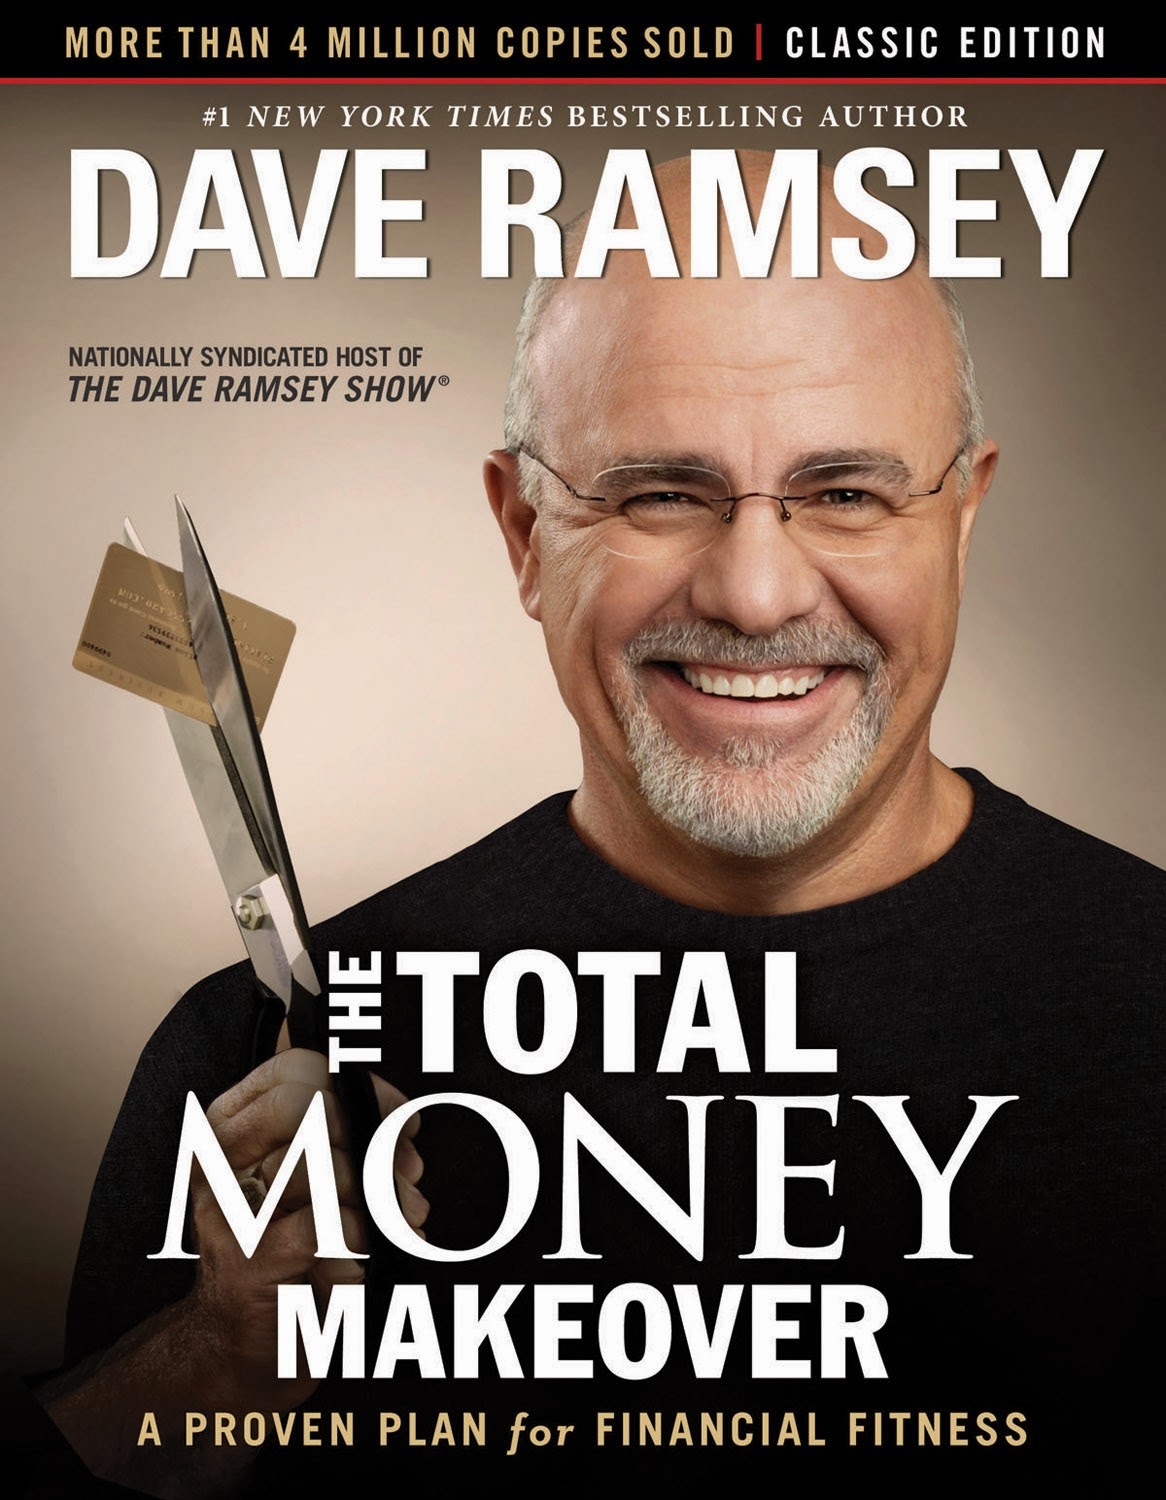 total money makeover website review